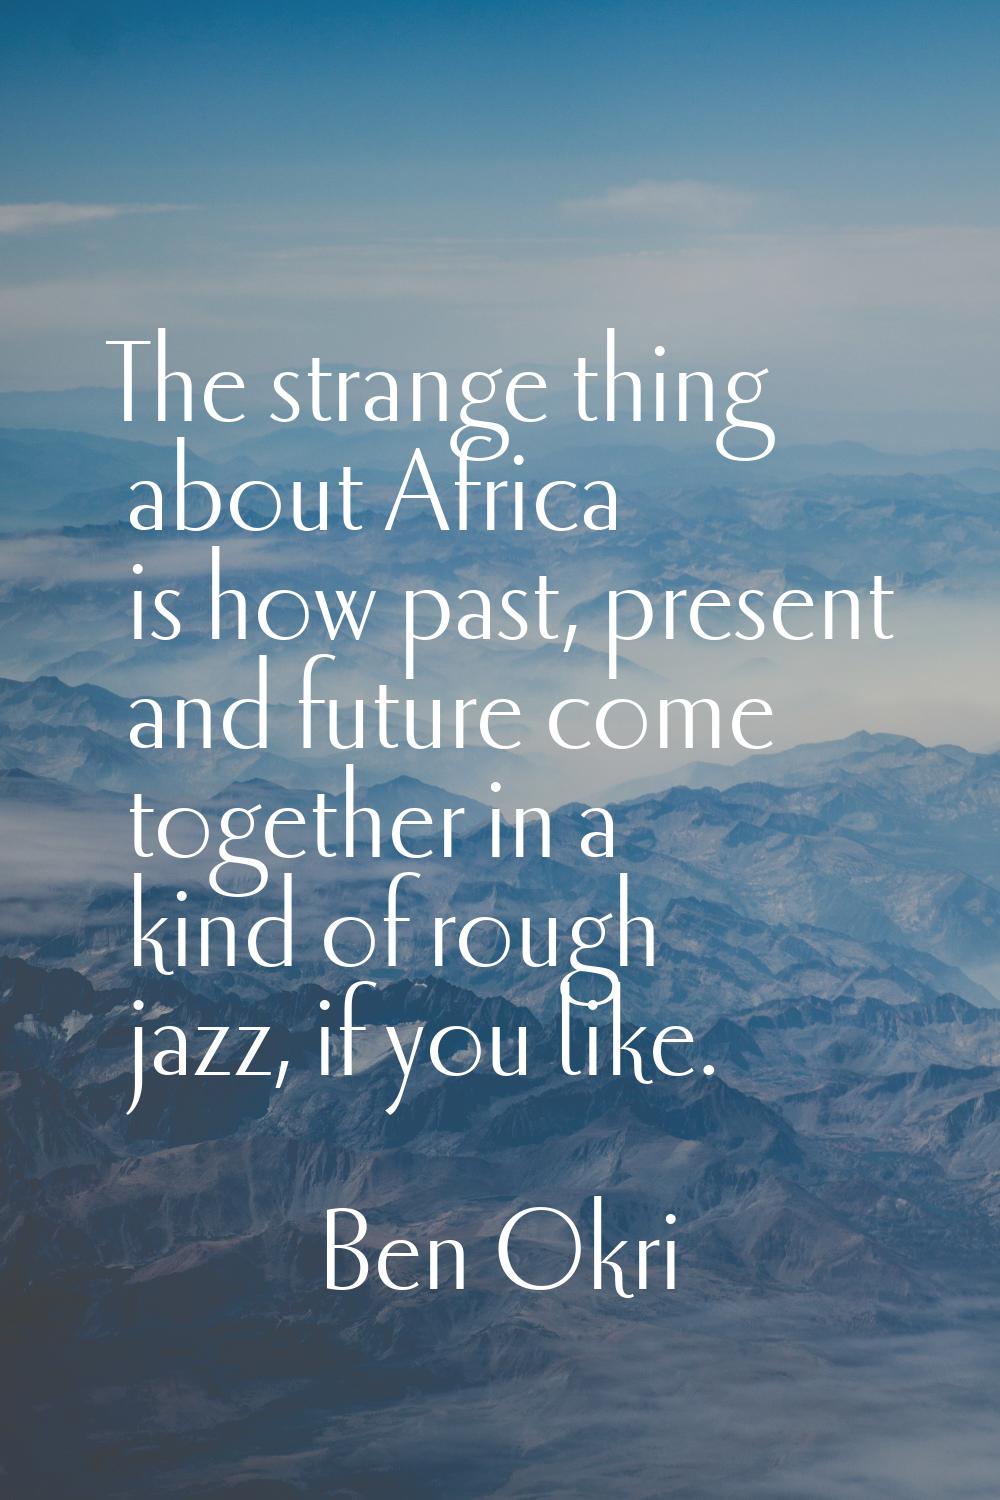 The strange thing about Africa is how past, present and future come together in a kind of rough jaz